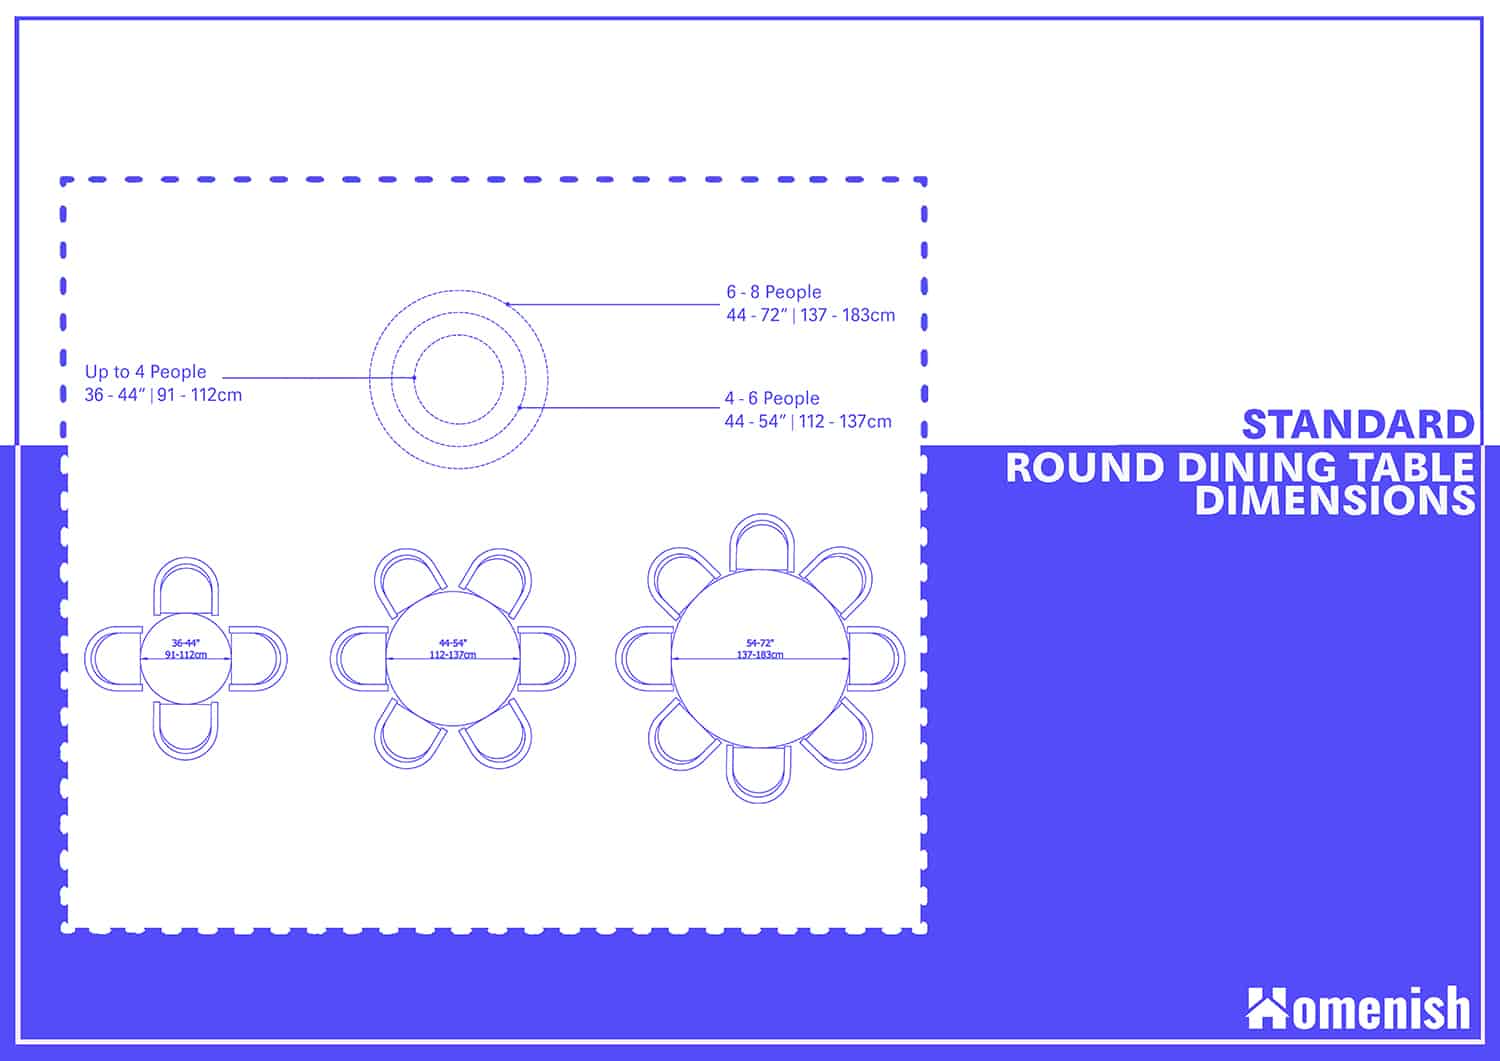 Standard Dining Table Dimensions, How Large Does A Round Table Need To Be Seat 6